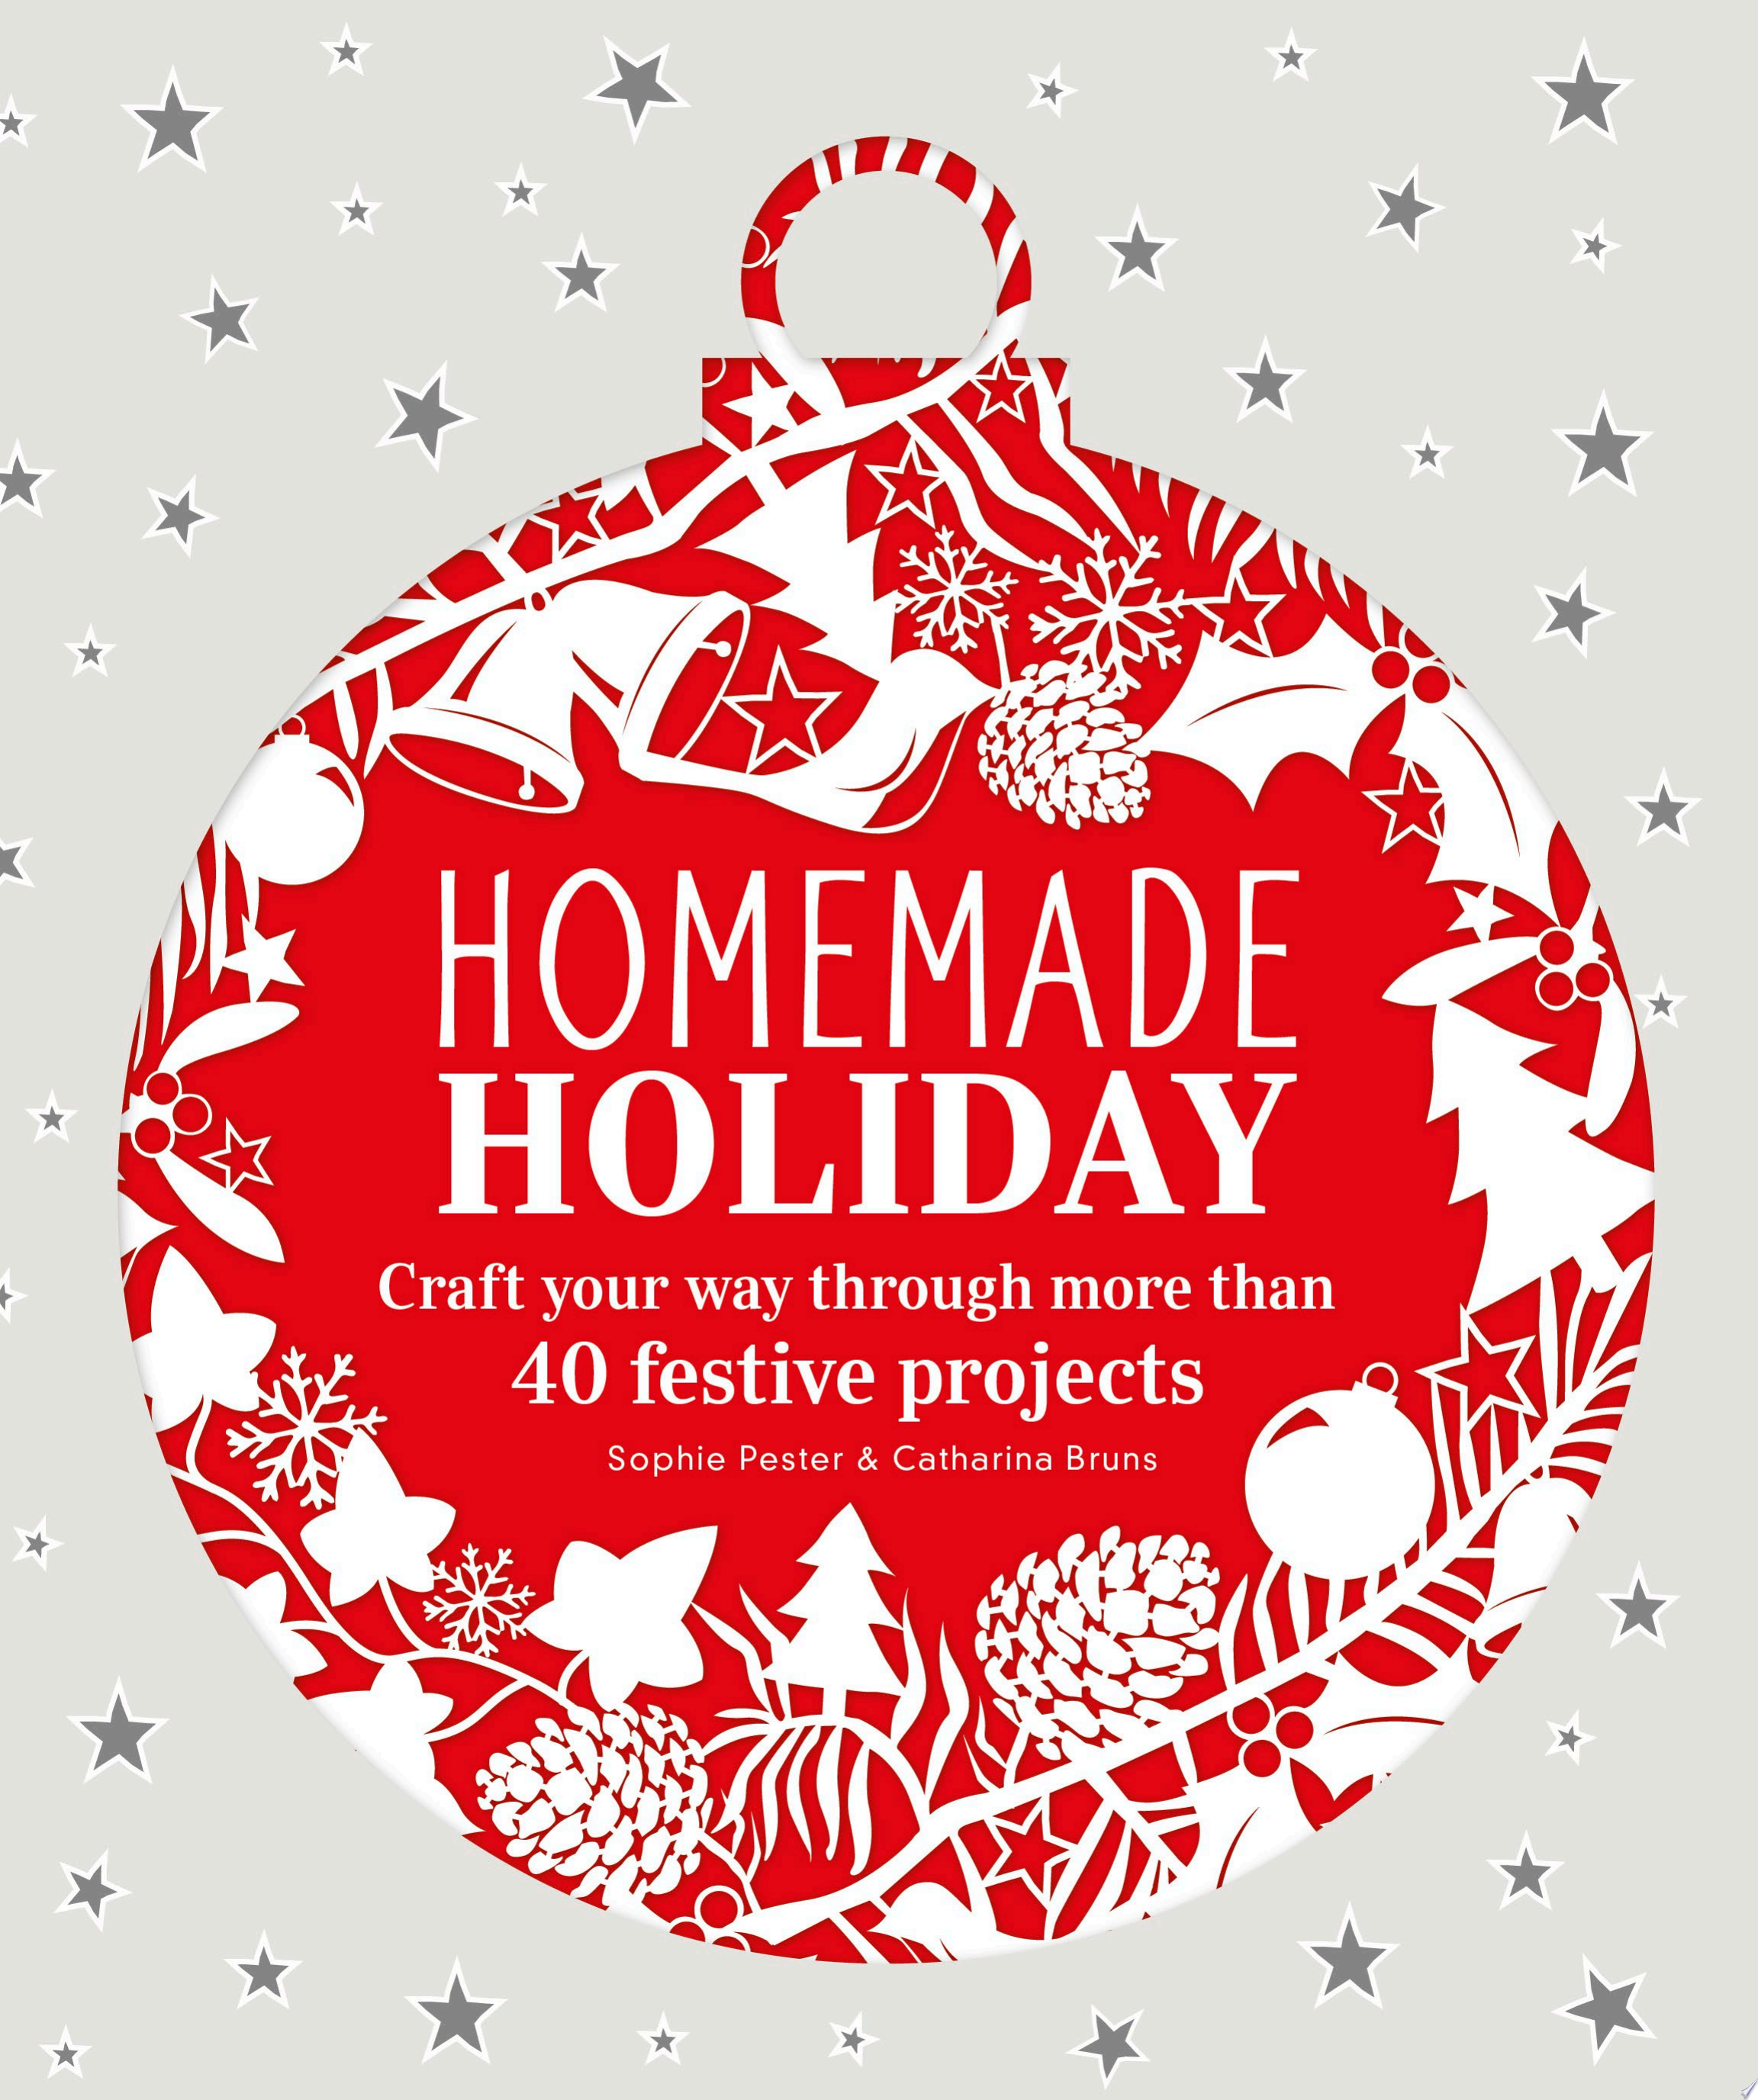 Image for "Homemade Holiday"